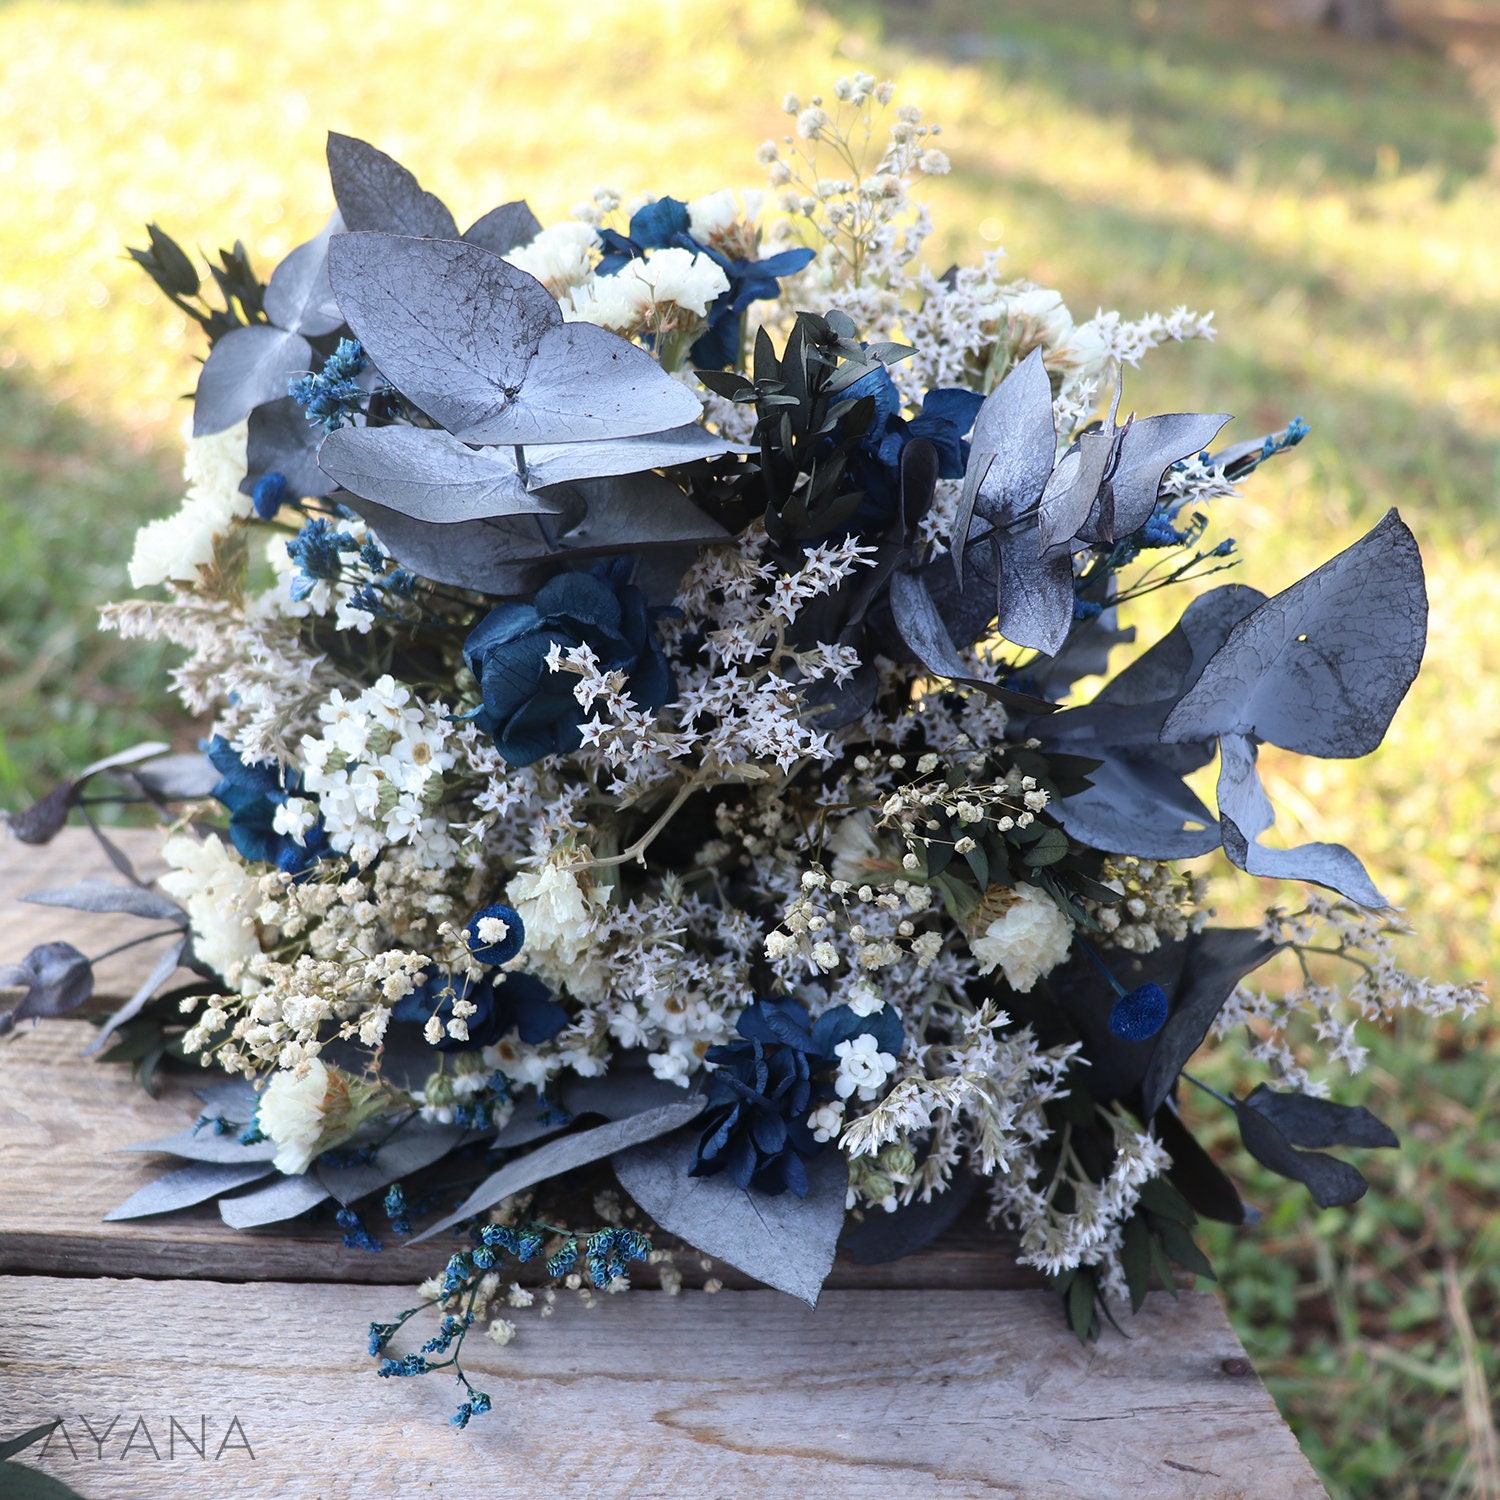 Blue Sky Preserved & Dried Flower Bouquet - Scentales's Flower on